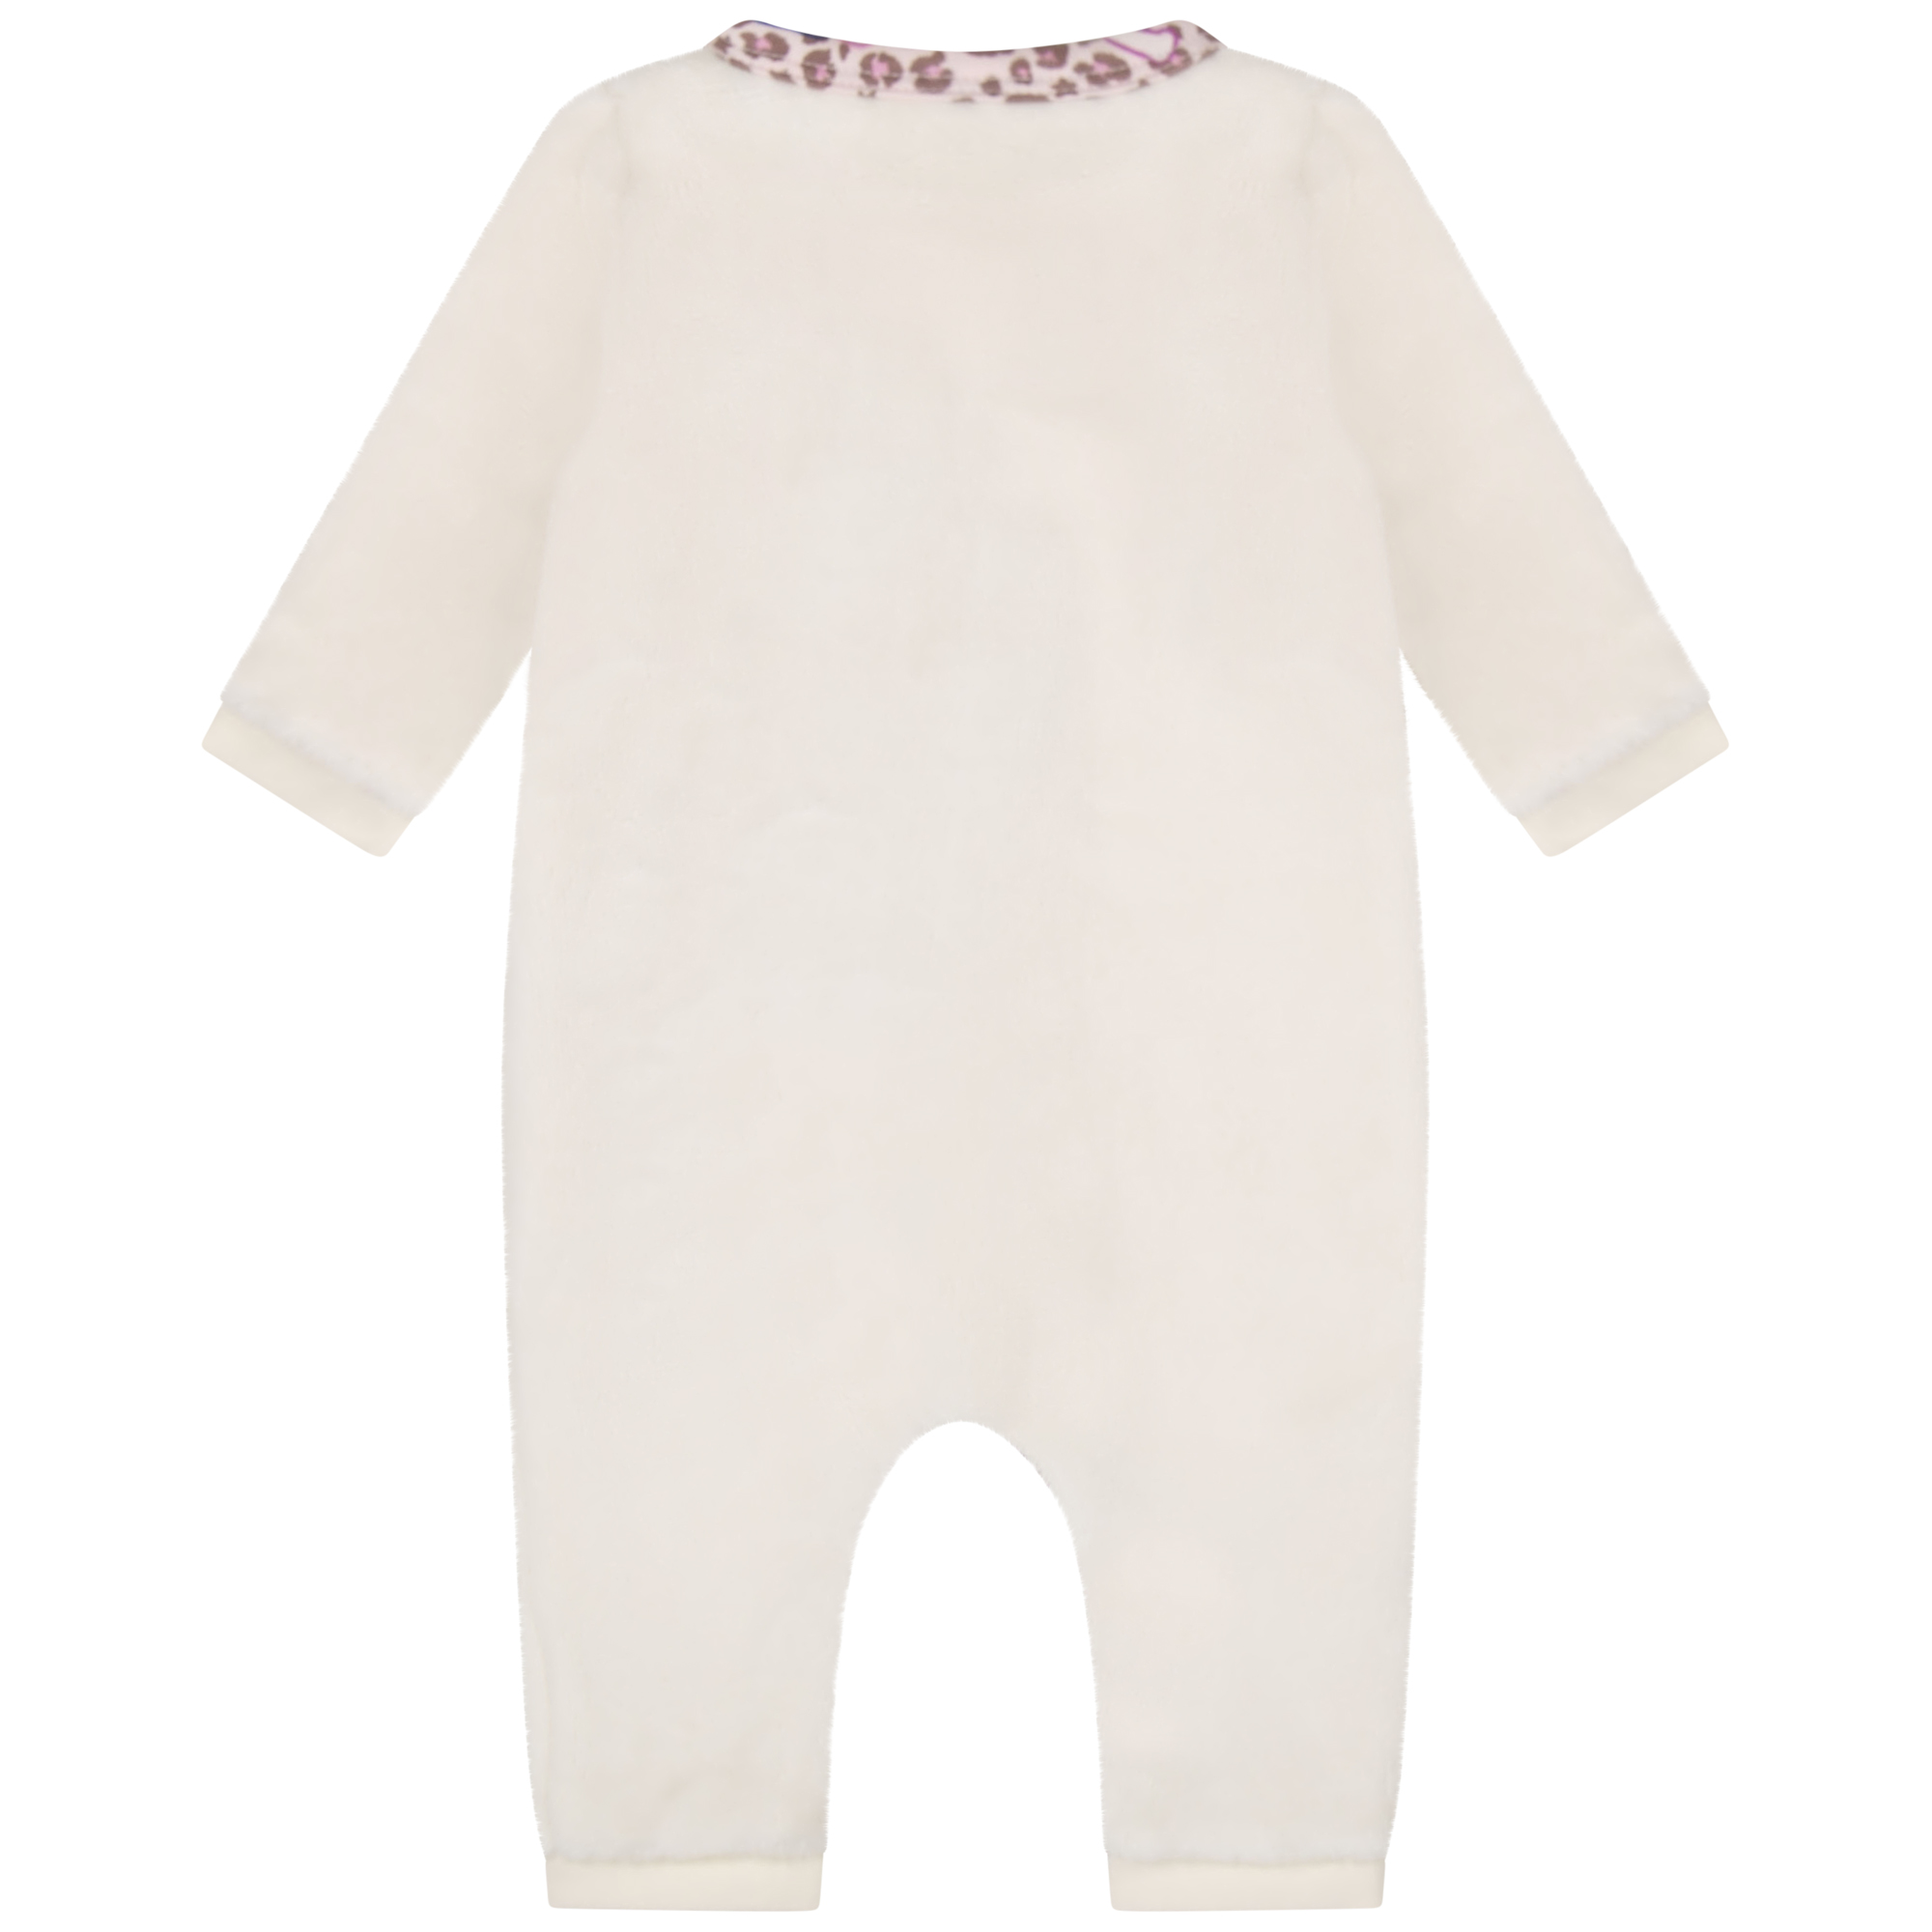 Embroidered fleece coveralls MARC JACOBS for UNISEX